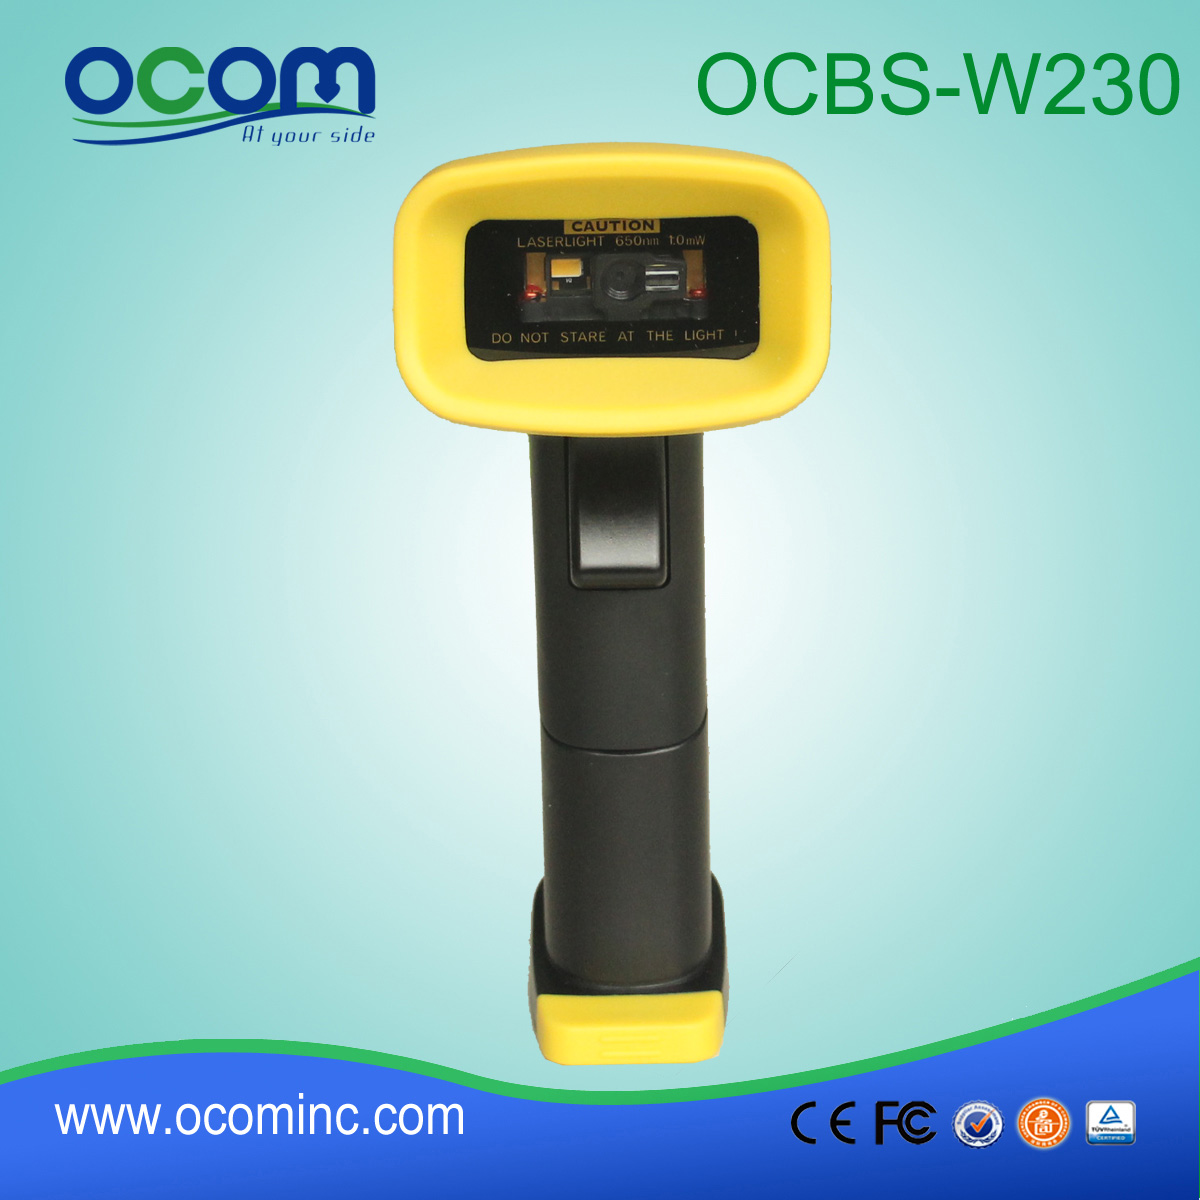 profesional bluetooth barcodescanner android, mini barcodelezer